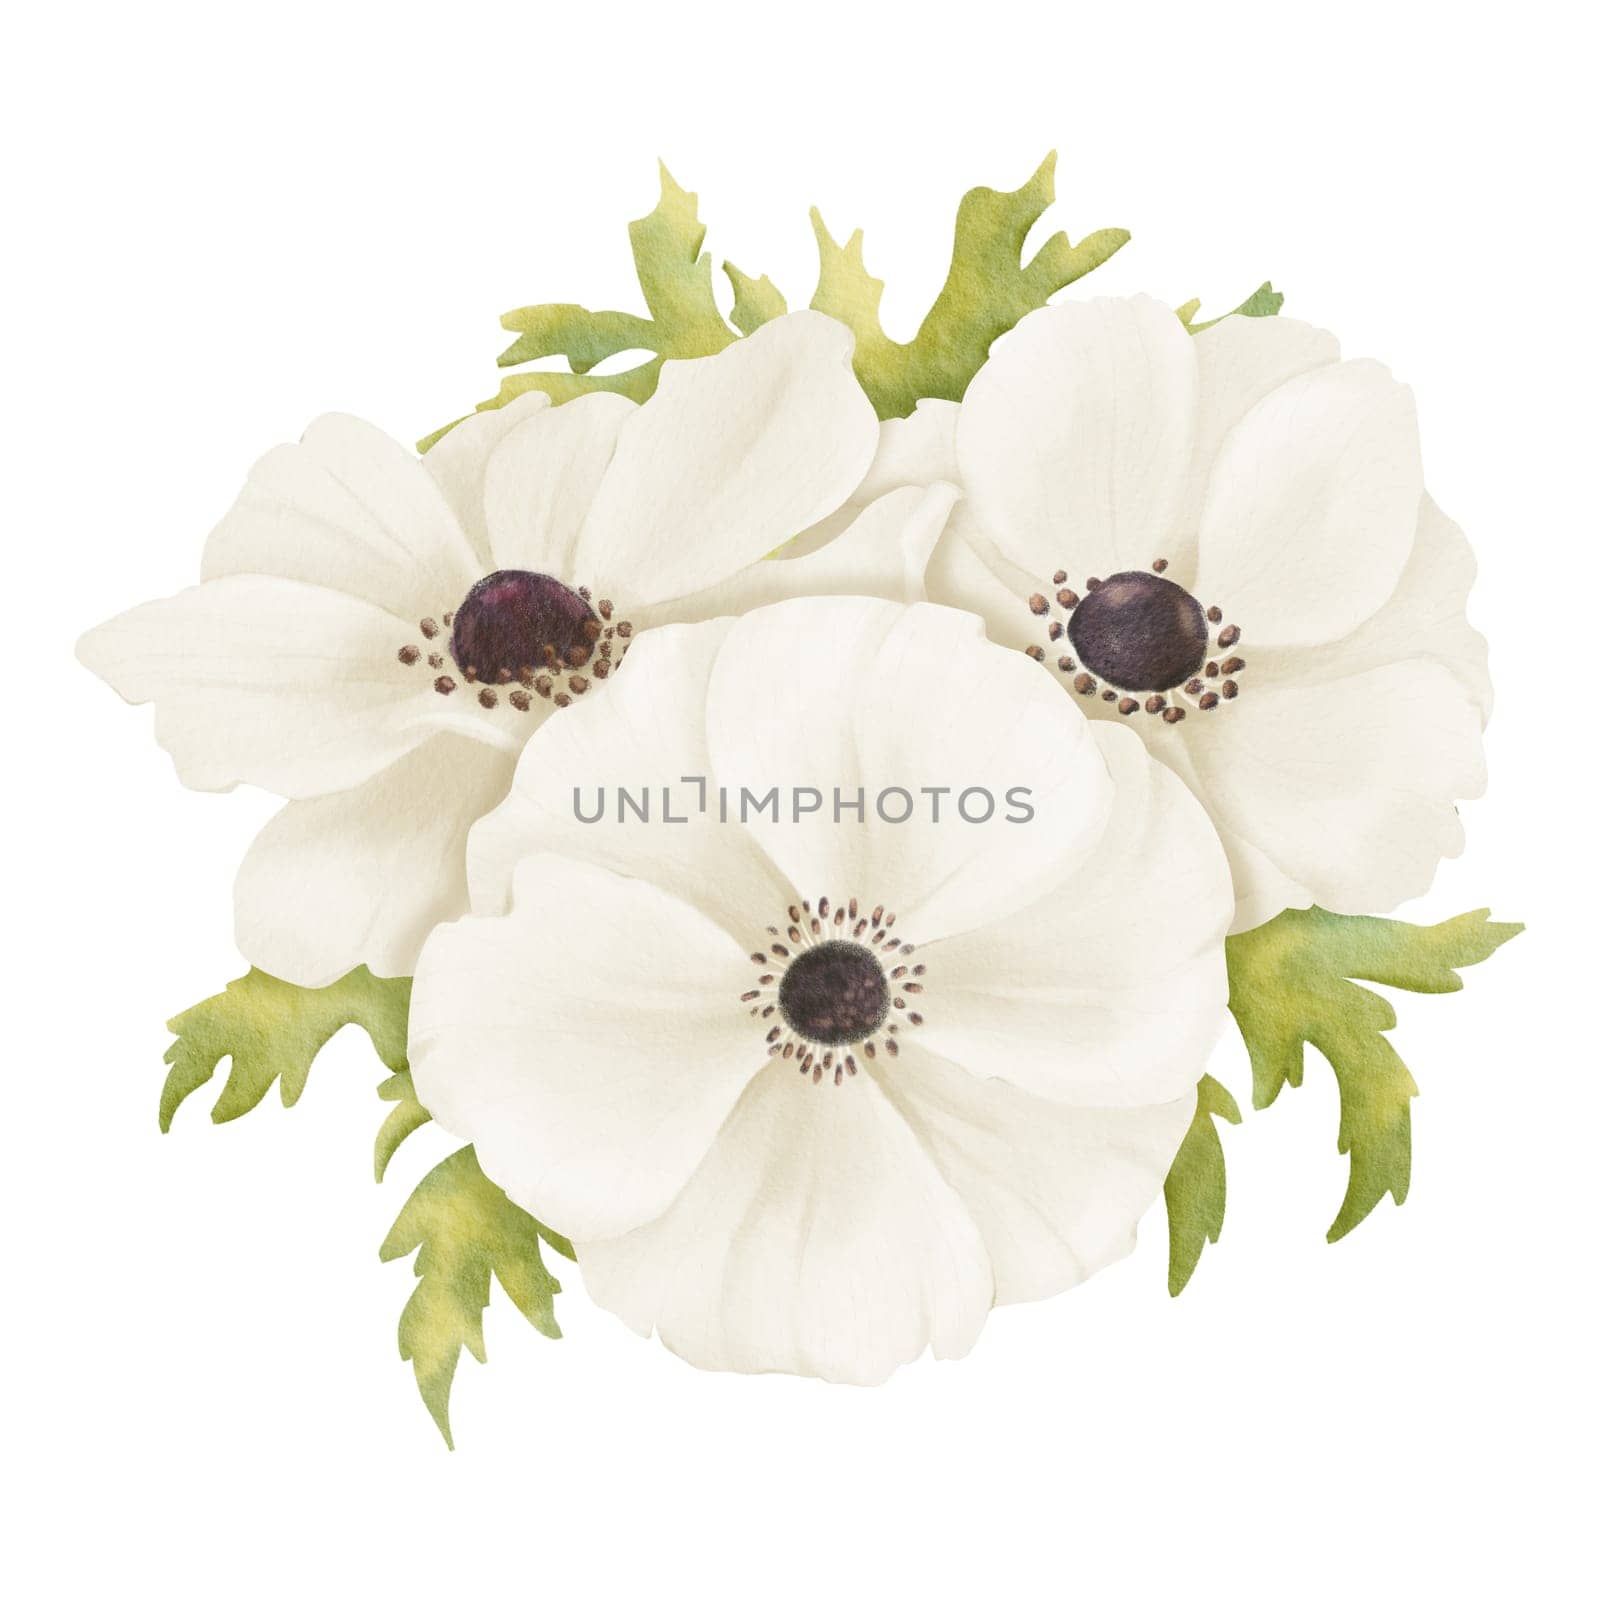 A tender watercolor depiction showcasing a bouquet of white anemones and fresh greenery. Suitable for a wide range of design projects including floral arrangements, boutonnieres, or digital graphics by Art_Mari_Ka